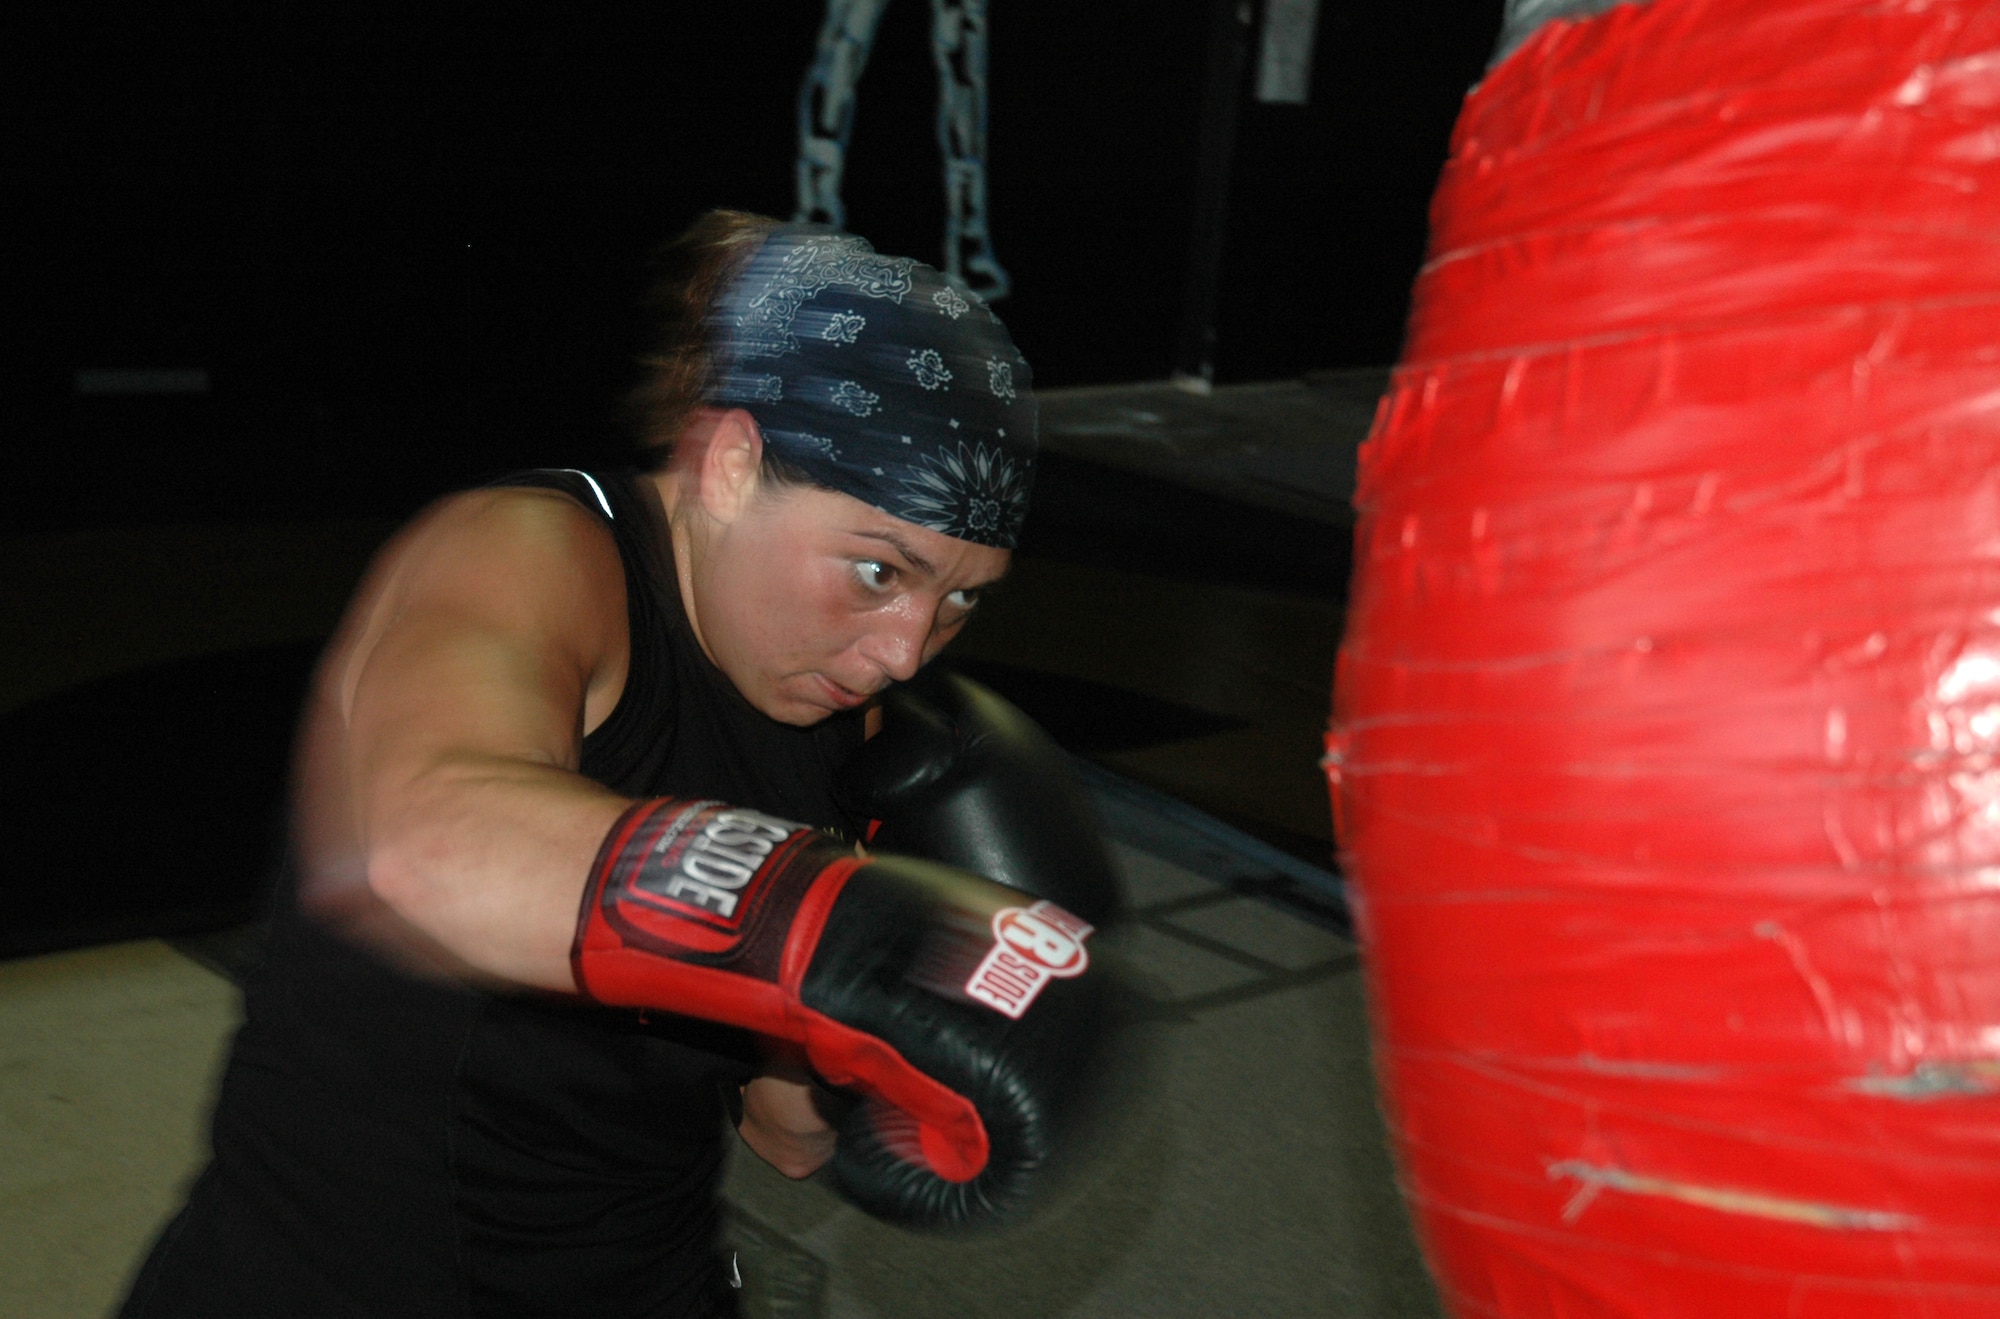 Senior Airman Crystal Wortman makes contact with a punching bag during a training session at a boxing gym in Panama City. (U.S. photo by Staff Sgt. Timothy Capling)